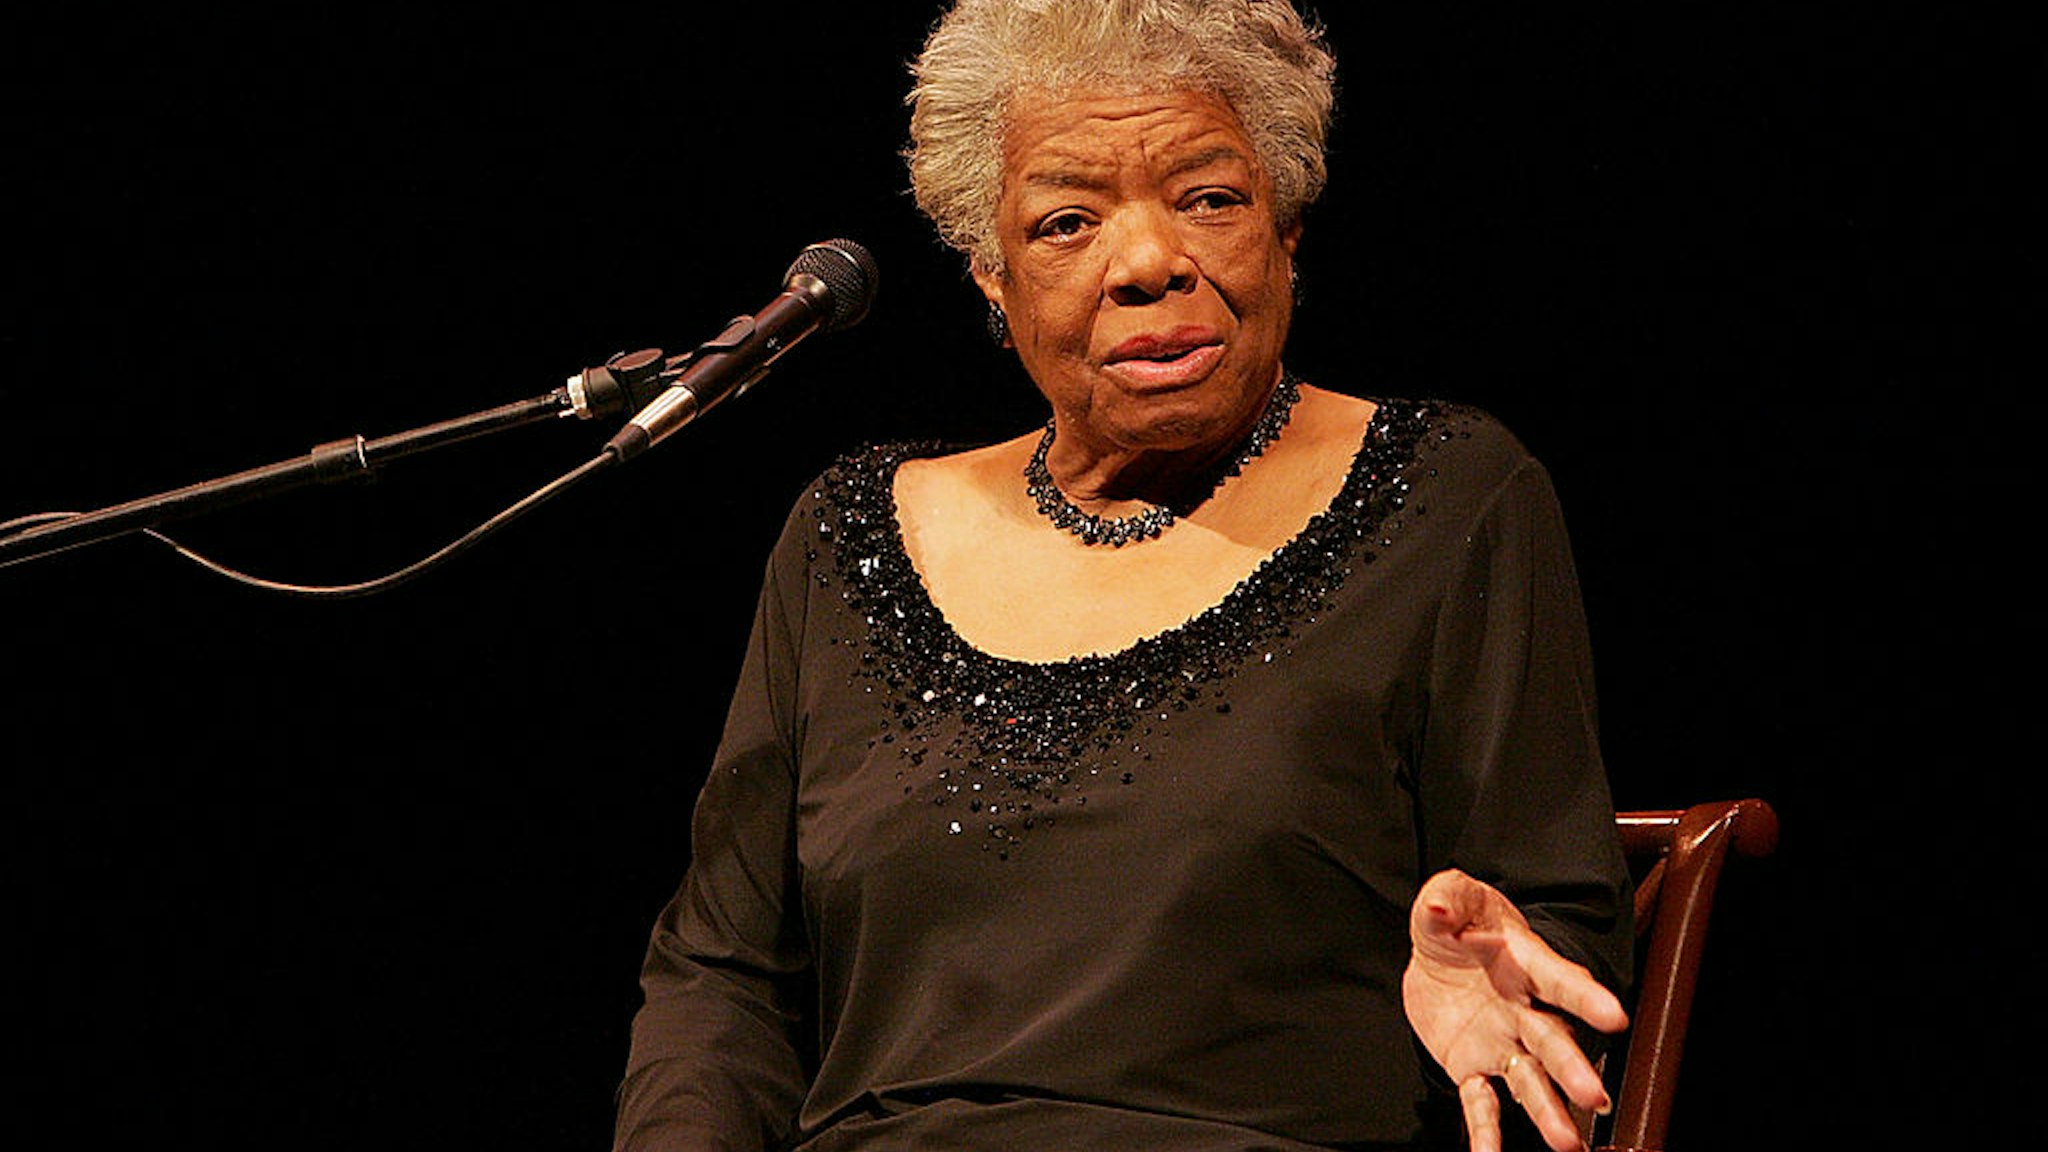 Dr. Maya Angelou speaks to a sold out crowd at the Paramount Theater on April 25, 2009 in Austin, Texas.